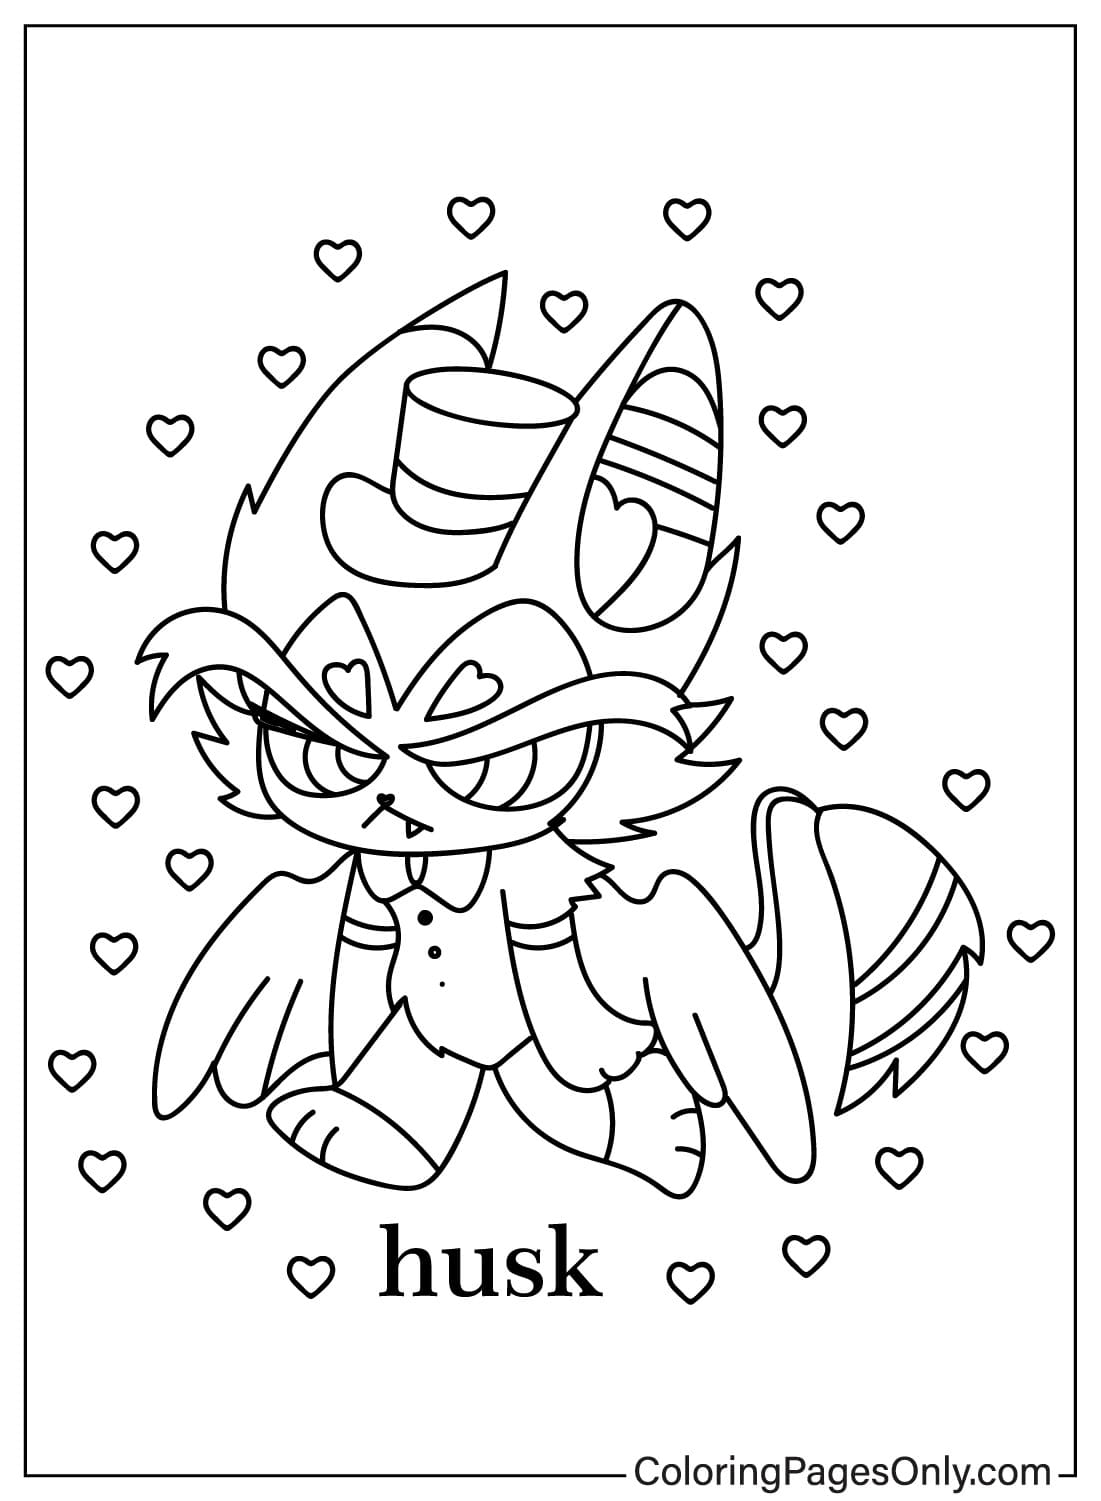 Chibi Husk Coloring Page from Husk